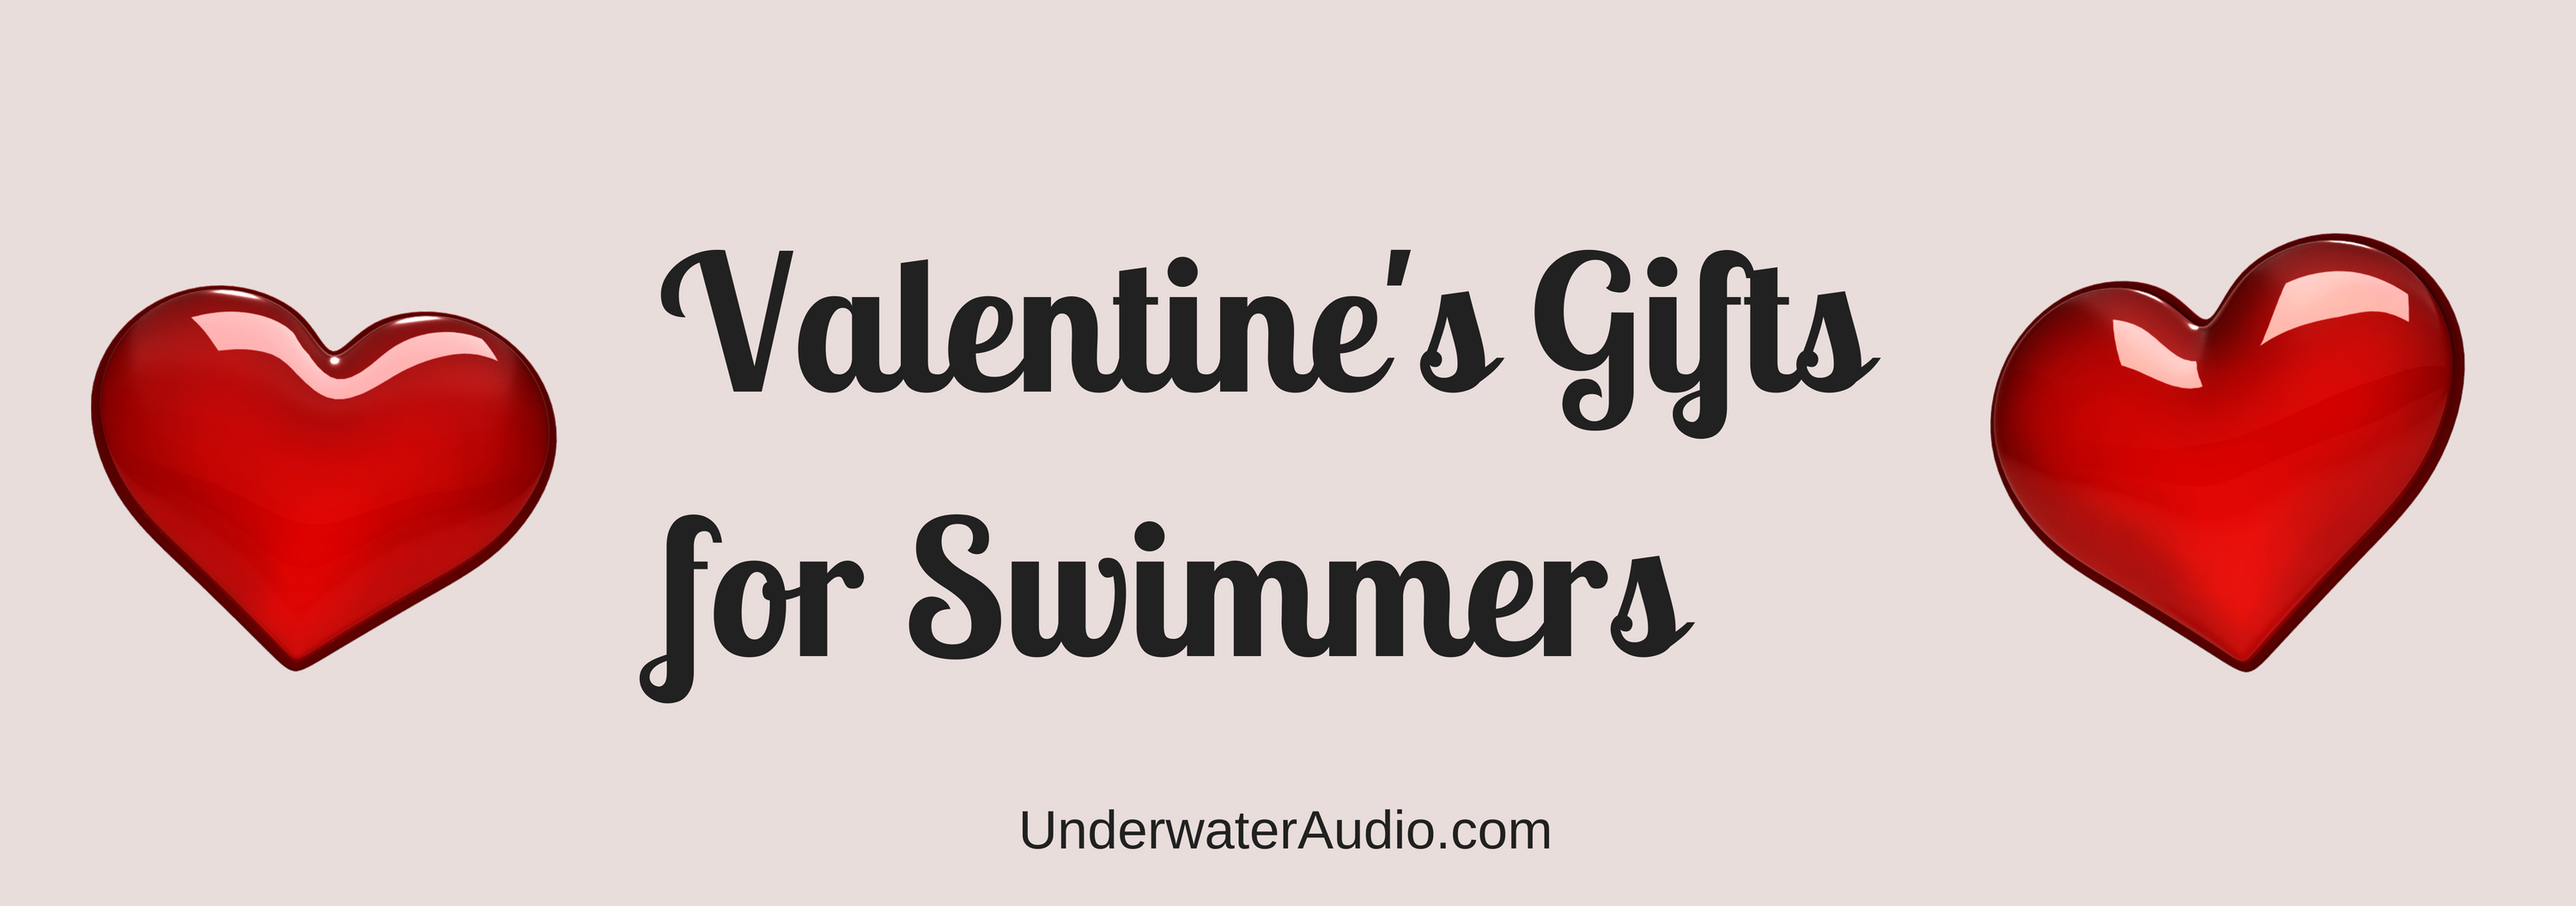 Best Gifts For Swimmers: 12 Gift Ideas That'll Go Over Swimmingly - Self  Propelled Sports